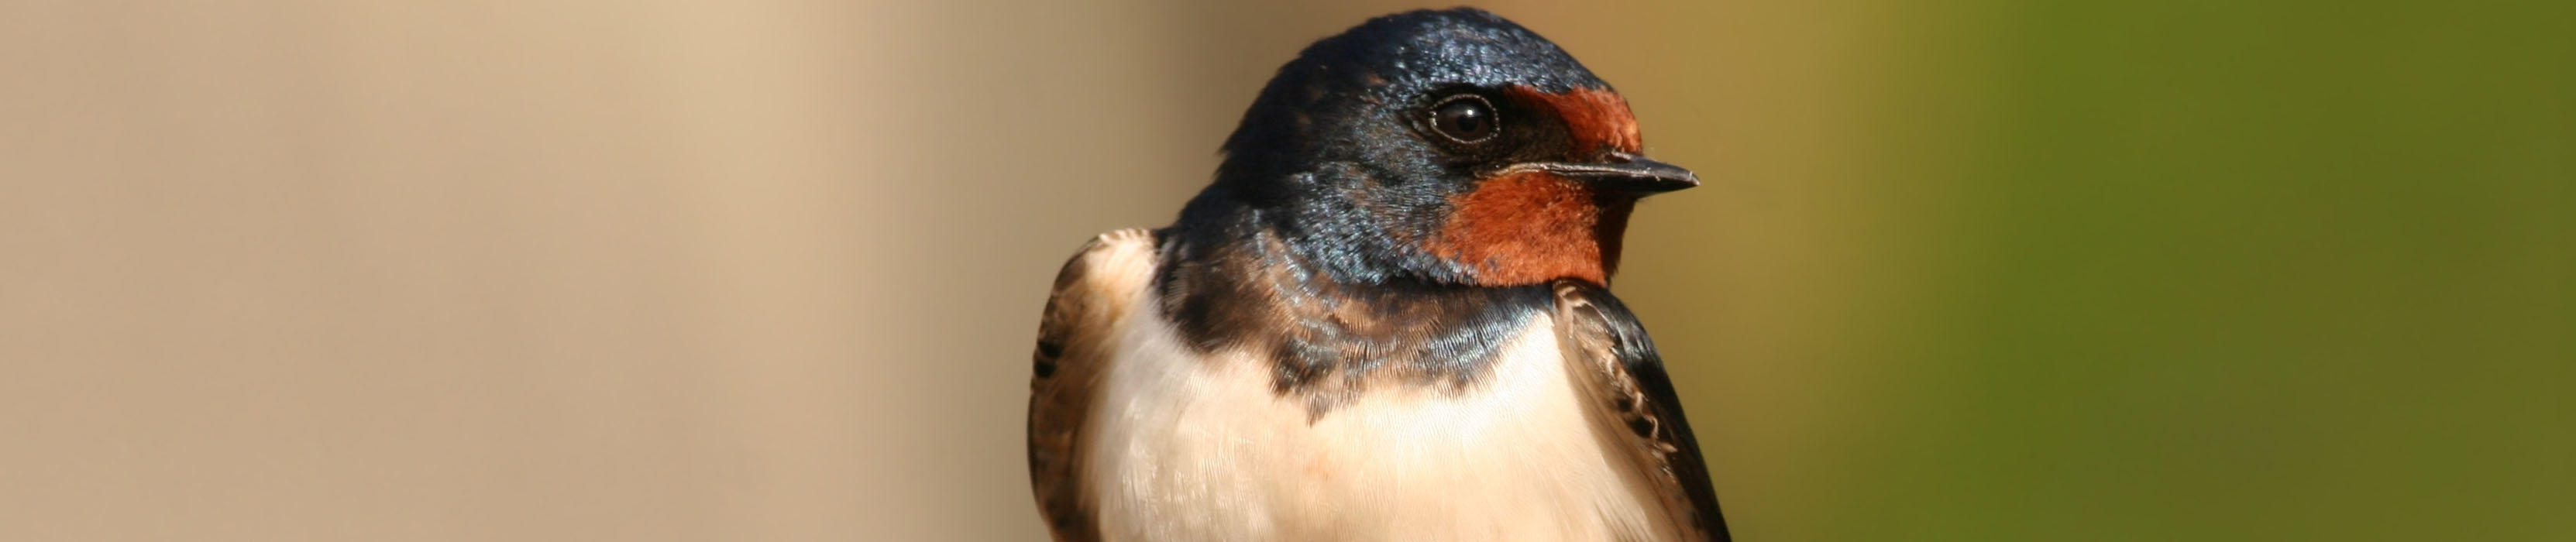 Image of a Barn Swallow